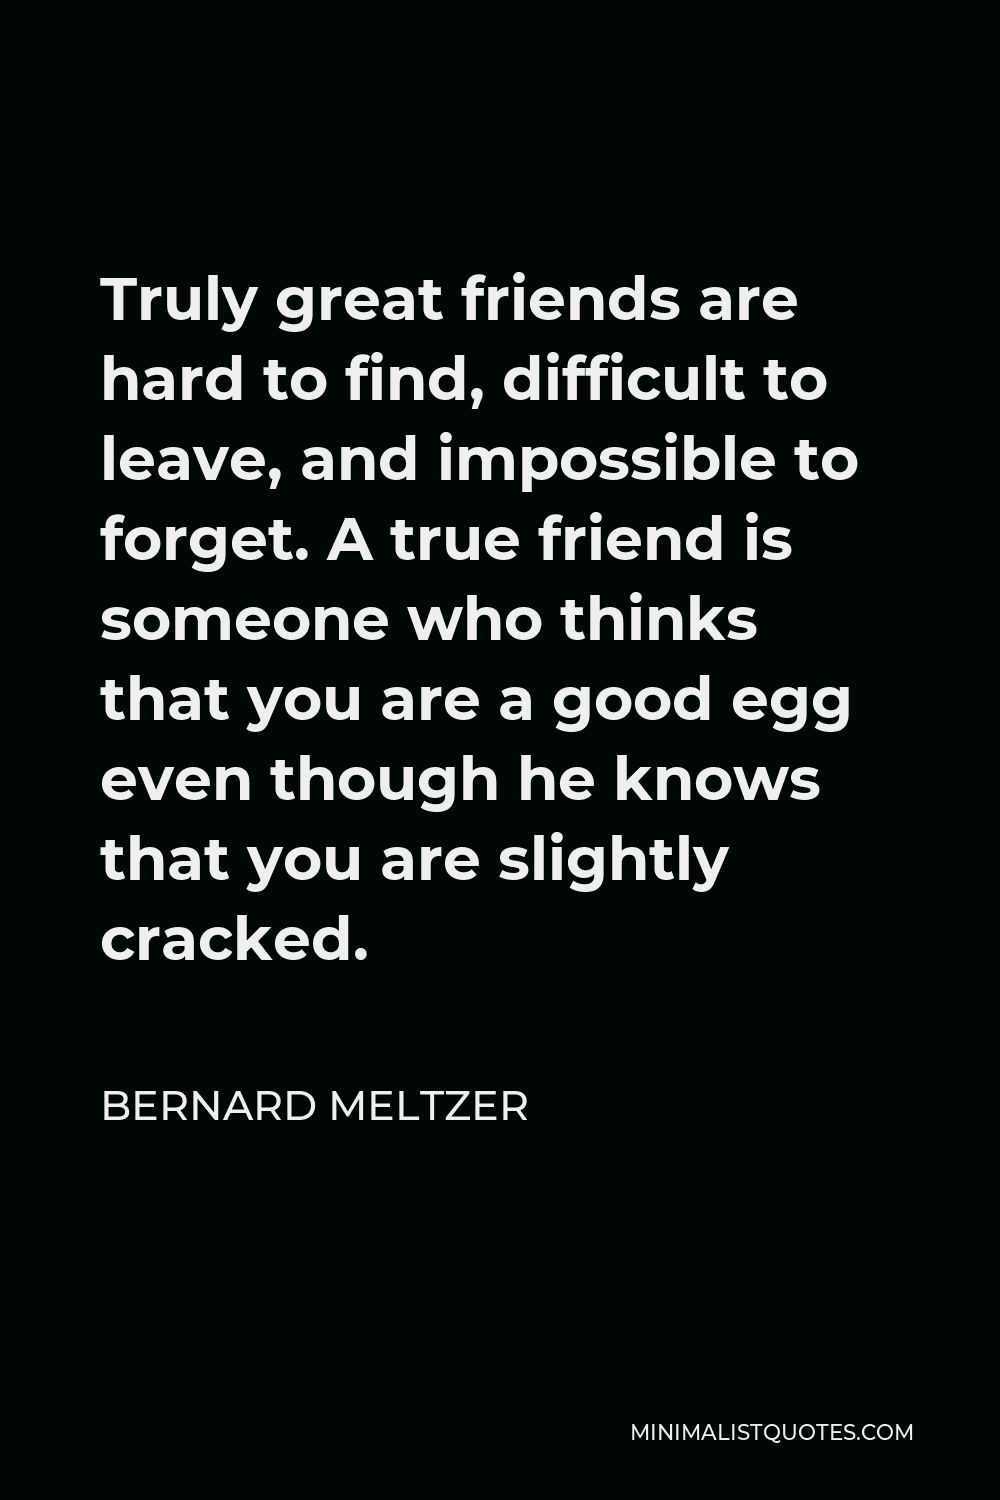 Bernard Meltzer Quote - Truly great friends are hard to find, difficult to leave, and impossible to forget. A true friend is someone who thinks that you are a good egg even though he knows that you are slightly cracked.